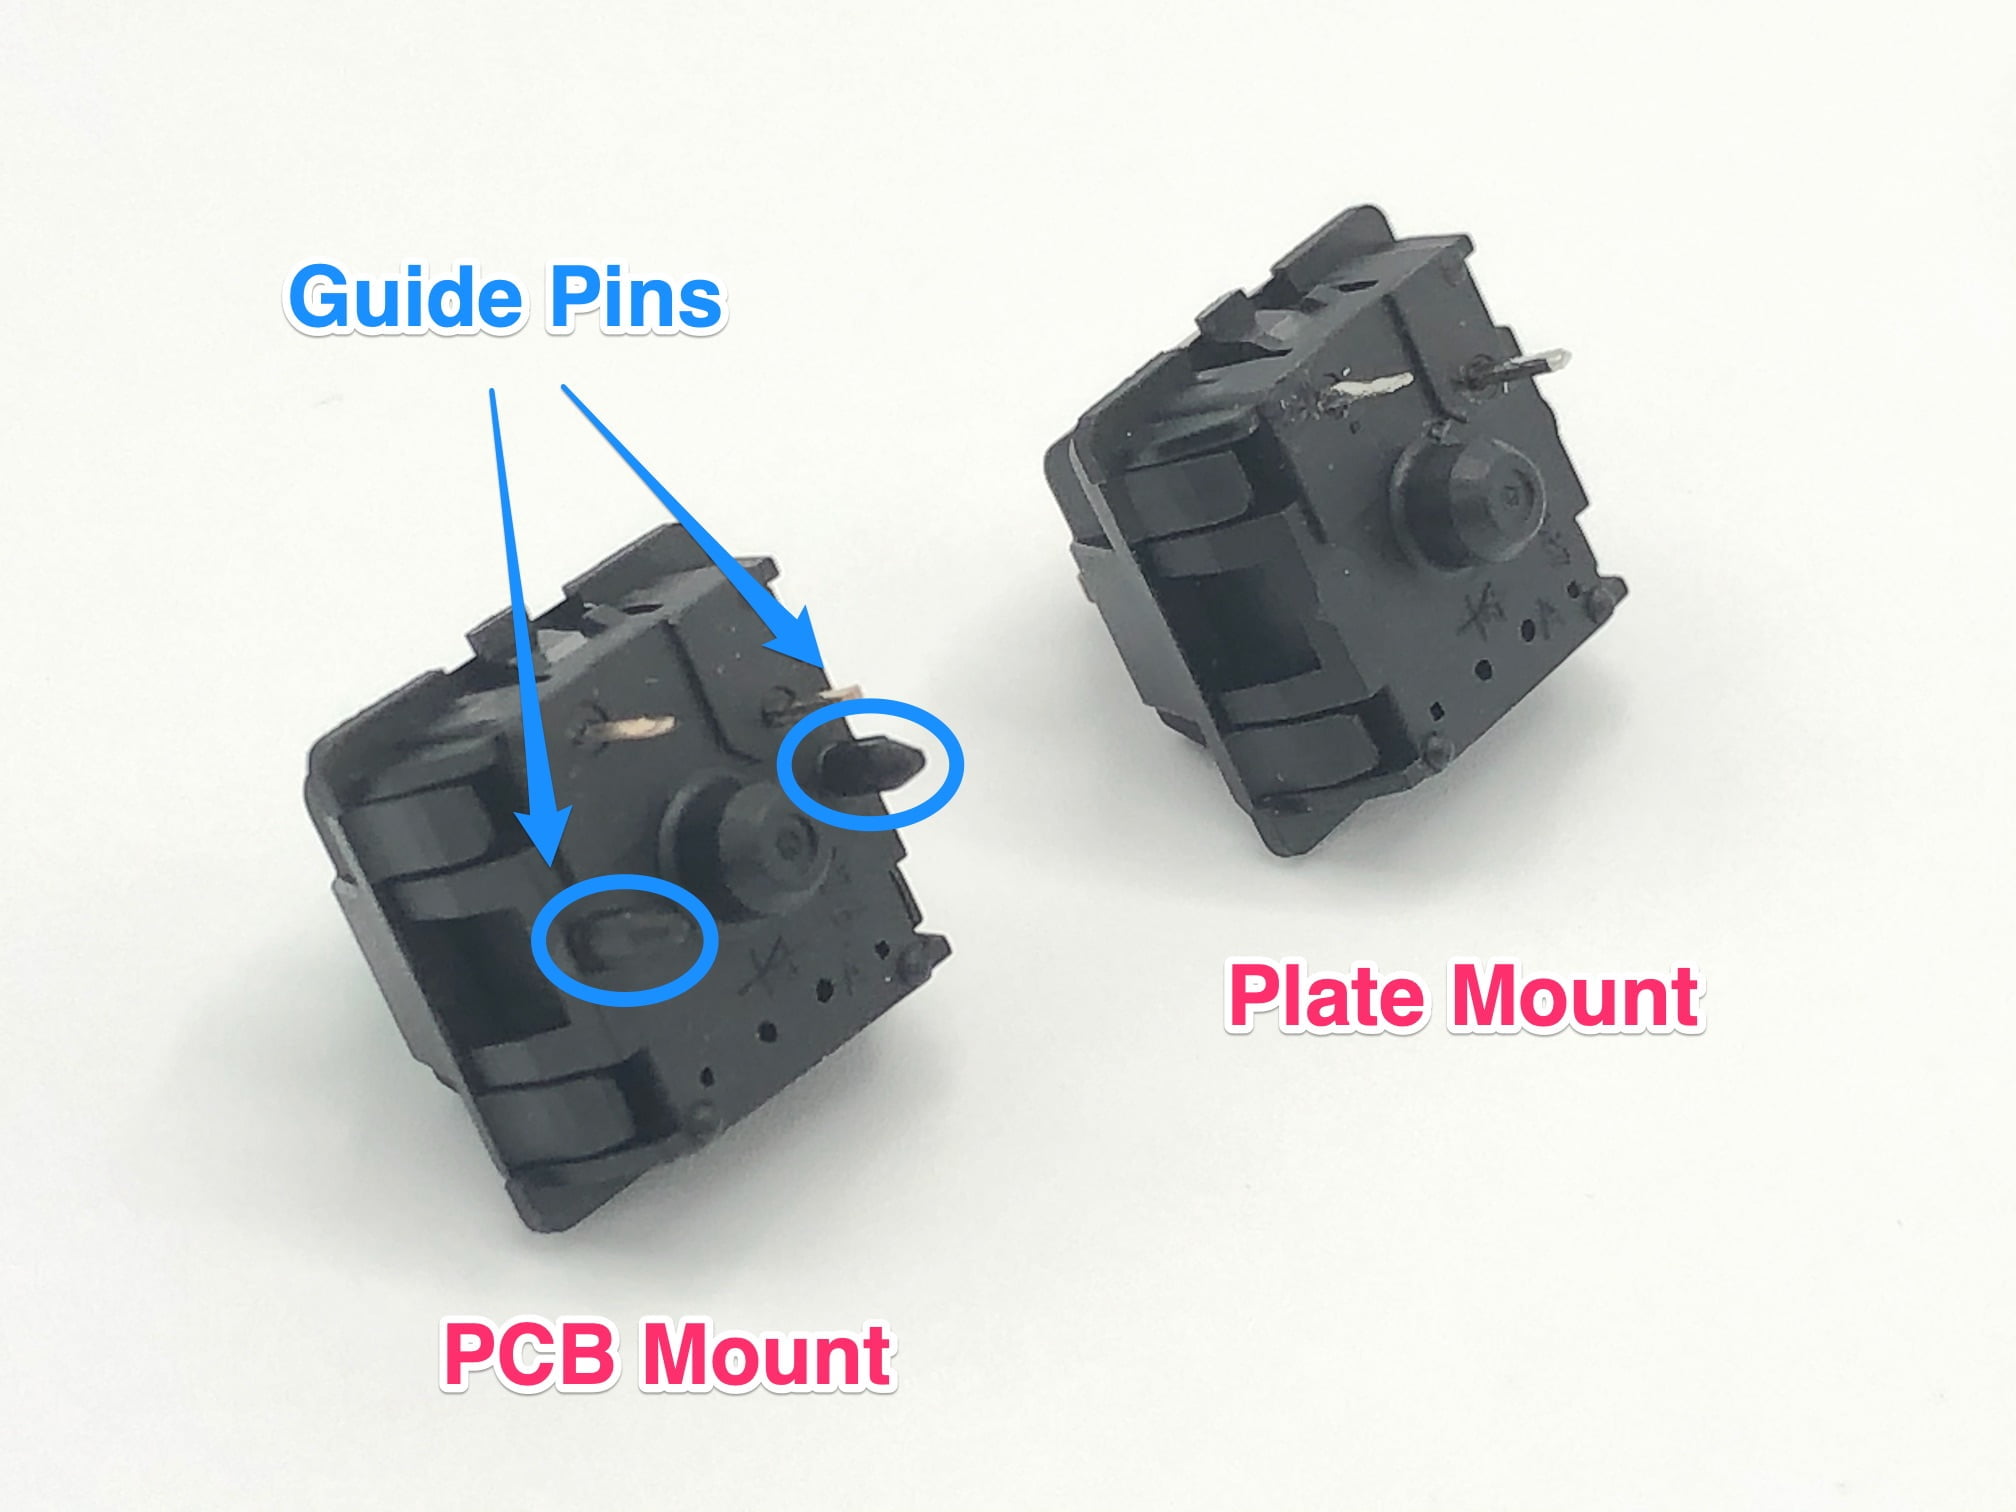 pcb mounted vs. plate mounted switches